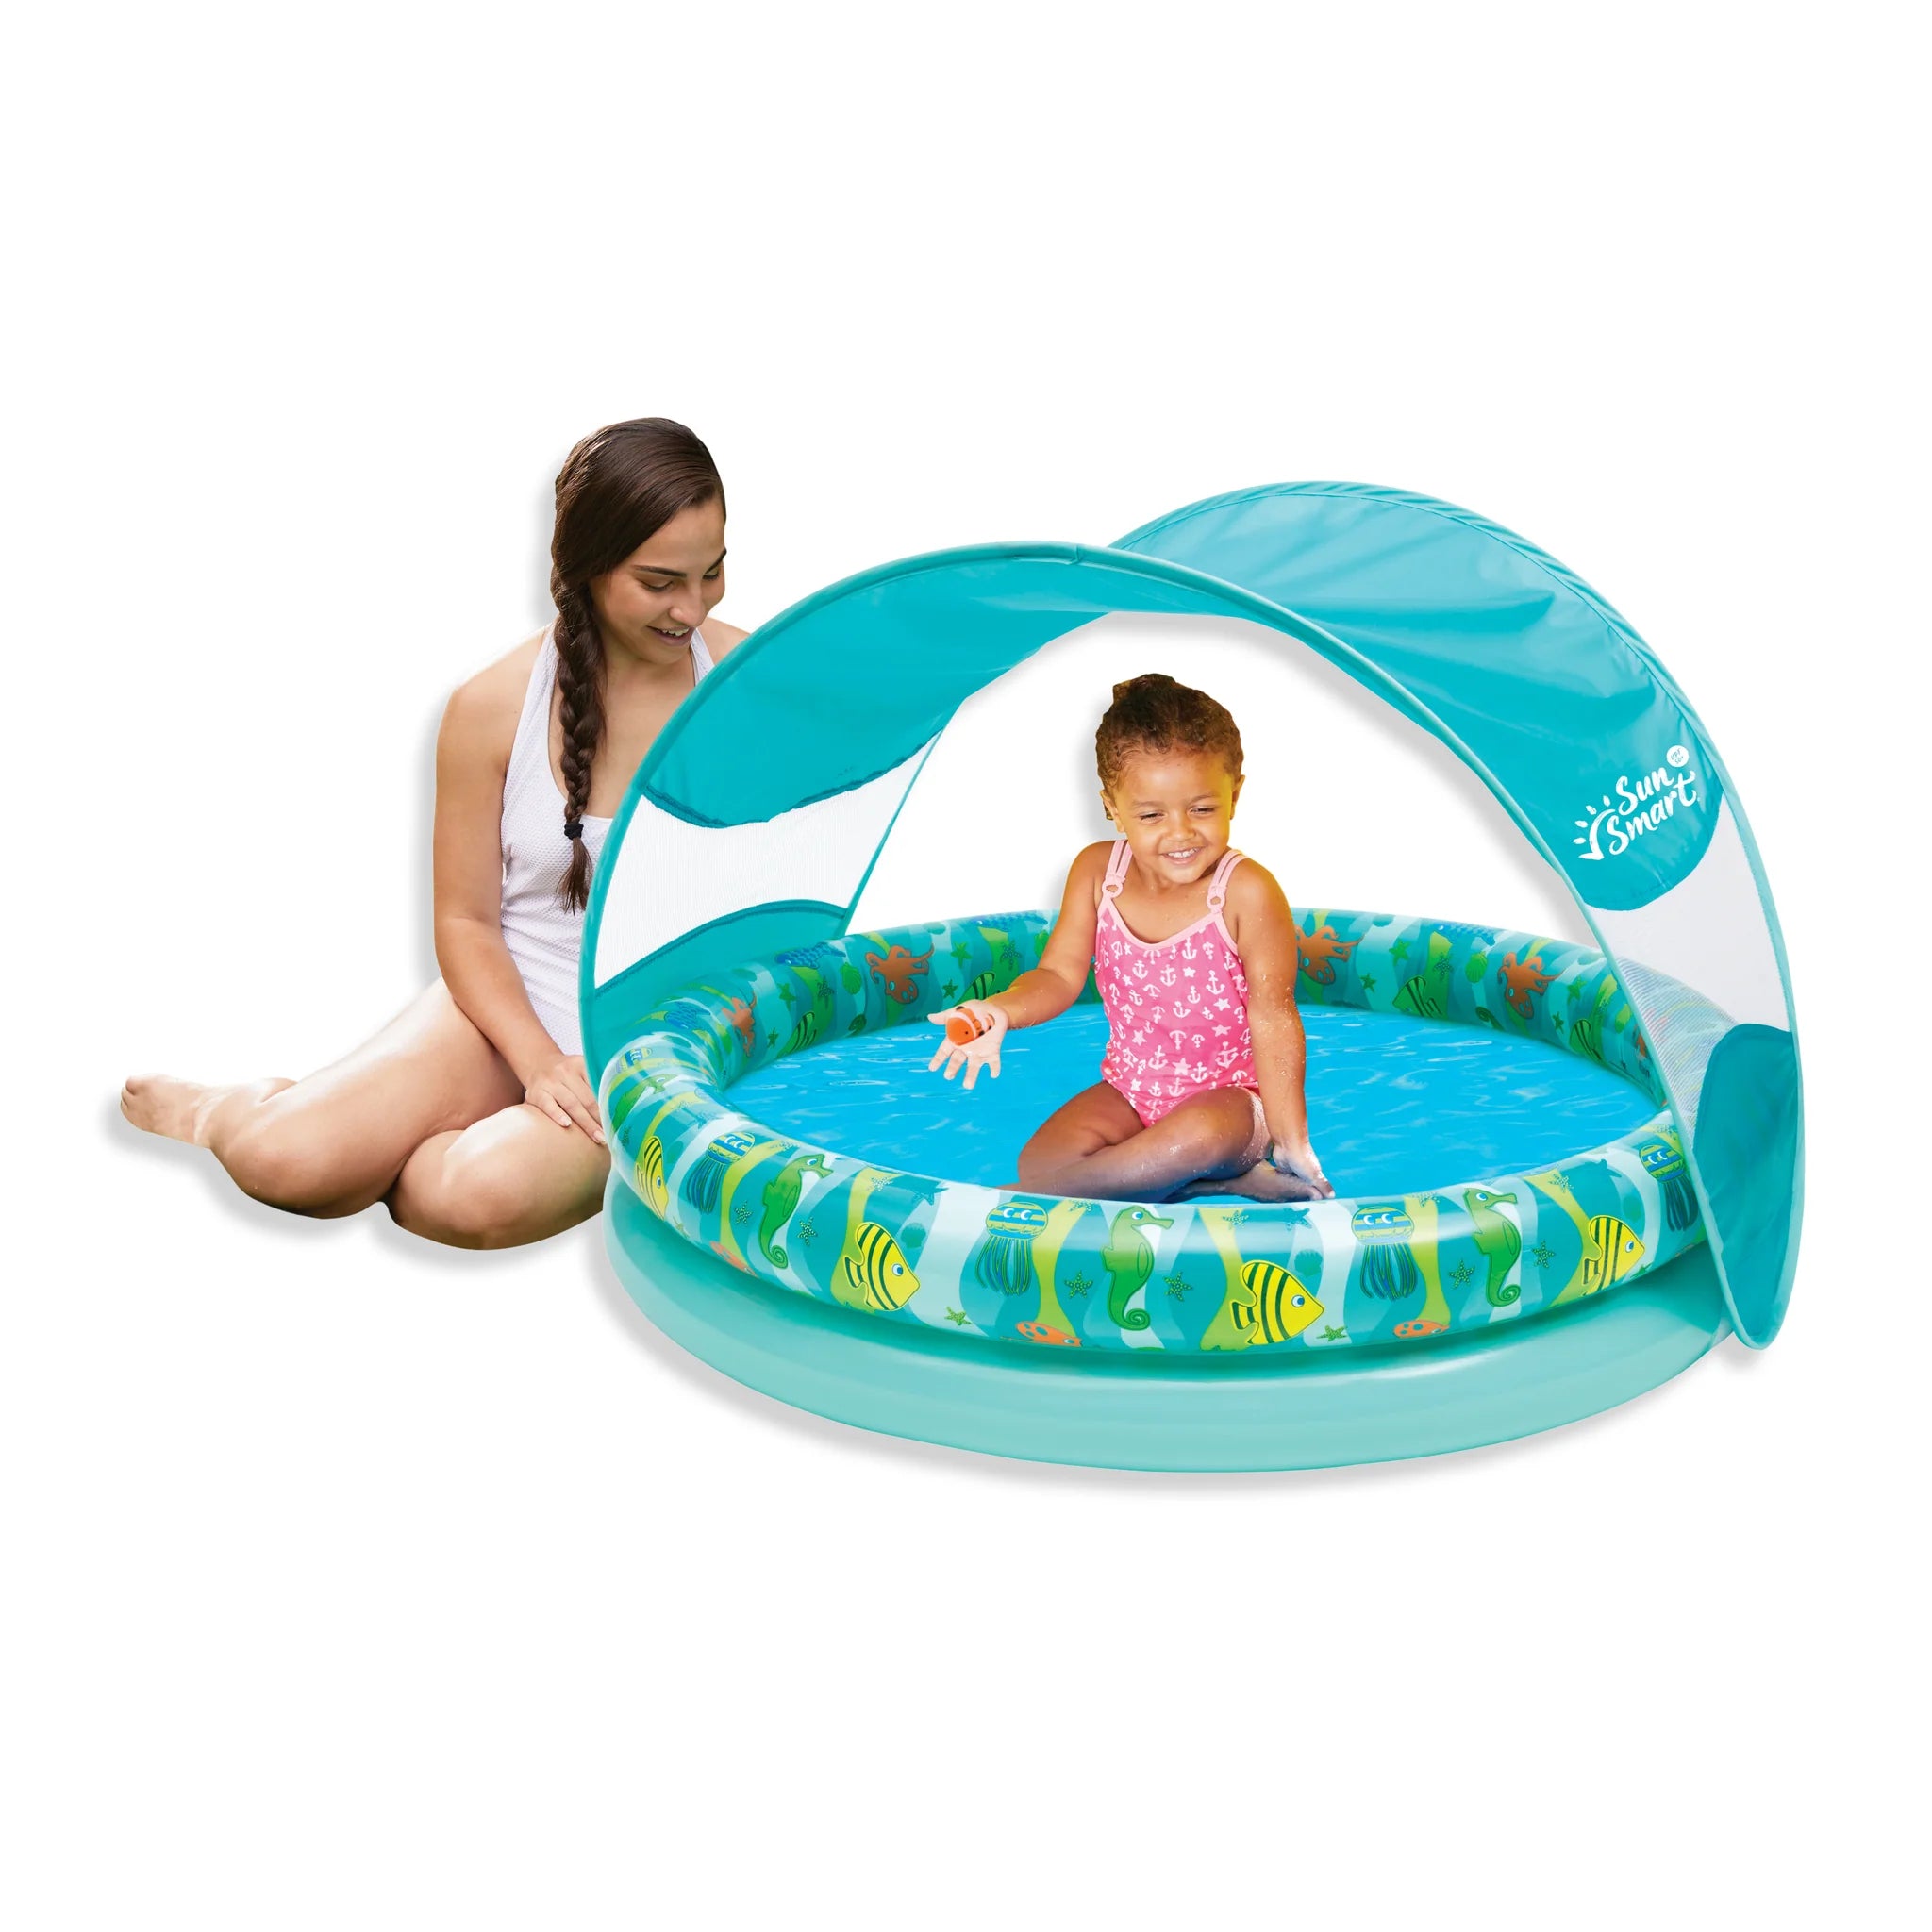 Sunshade Canopy Pool with Carry Bag